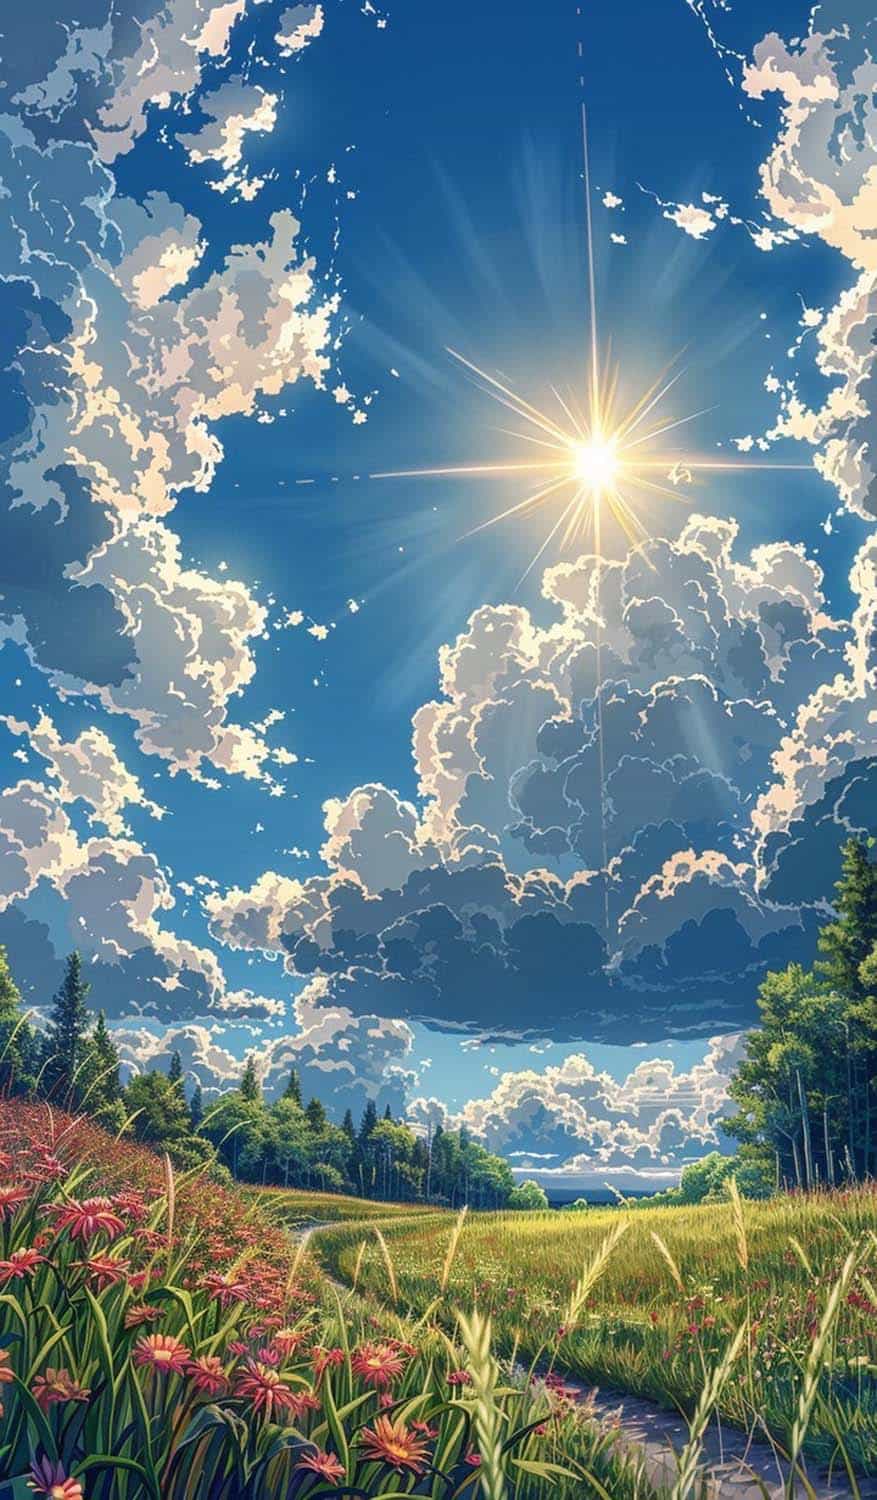 Sunrays and Vibrant Sky By gogoblingo iPhone Wallpaper HD